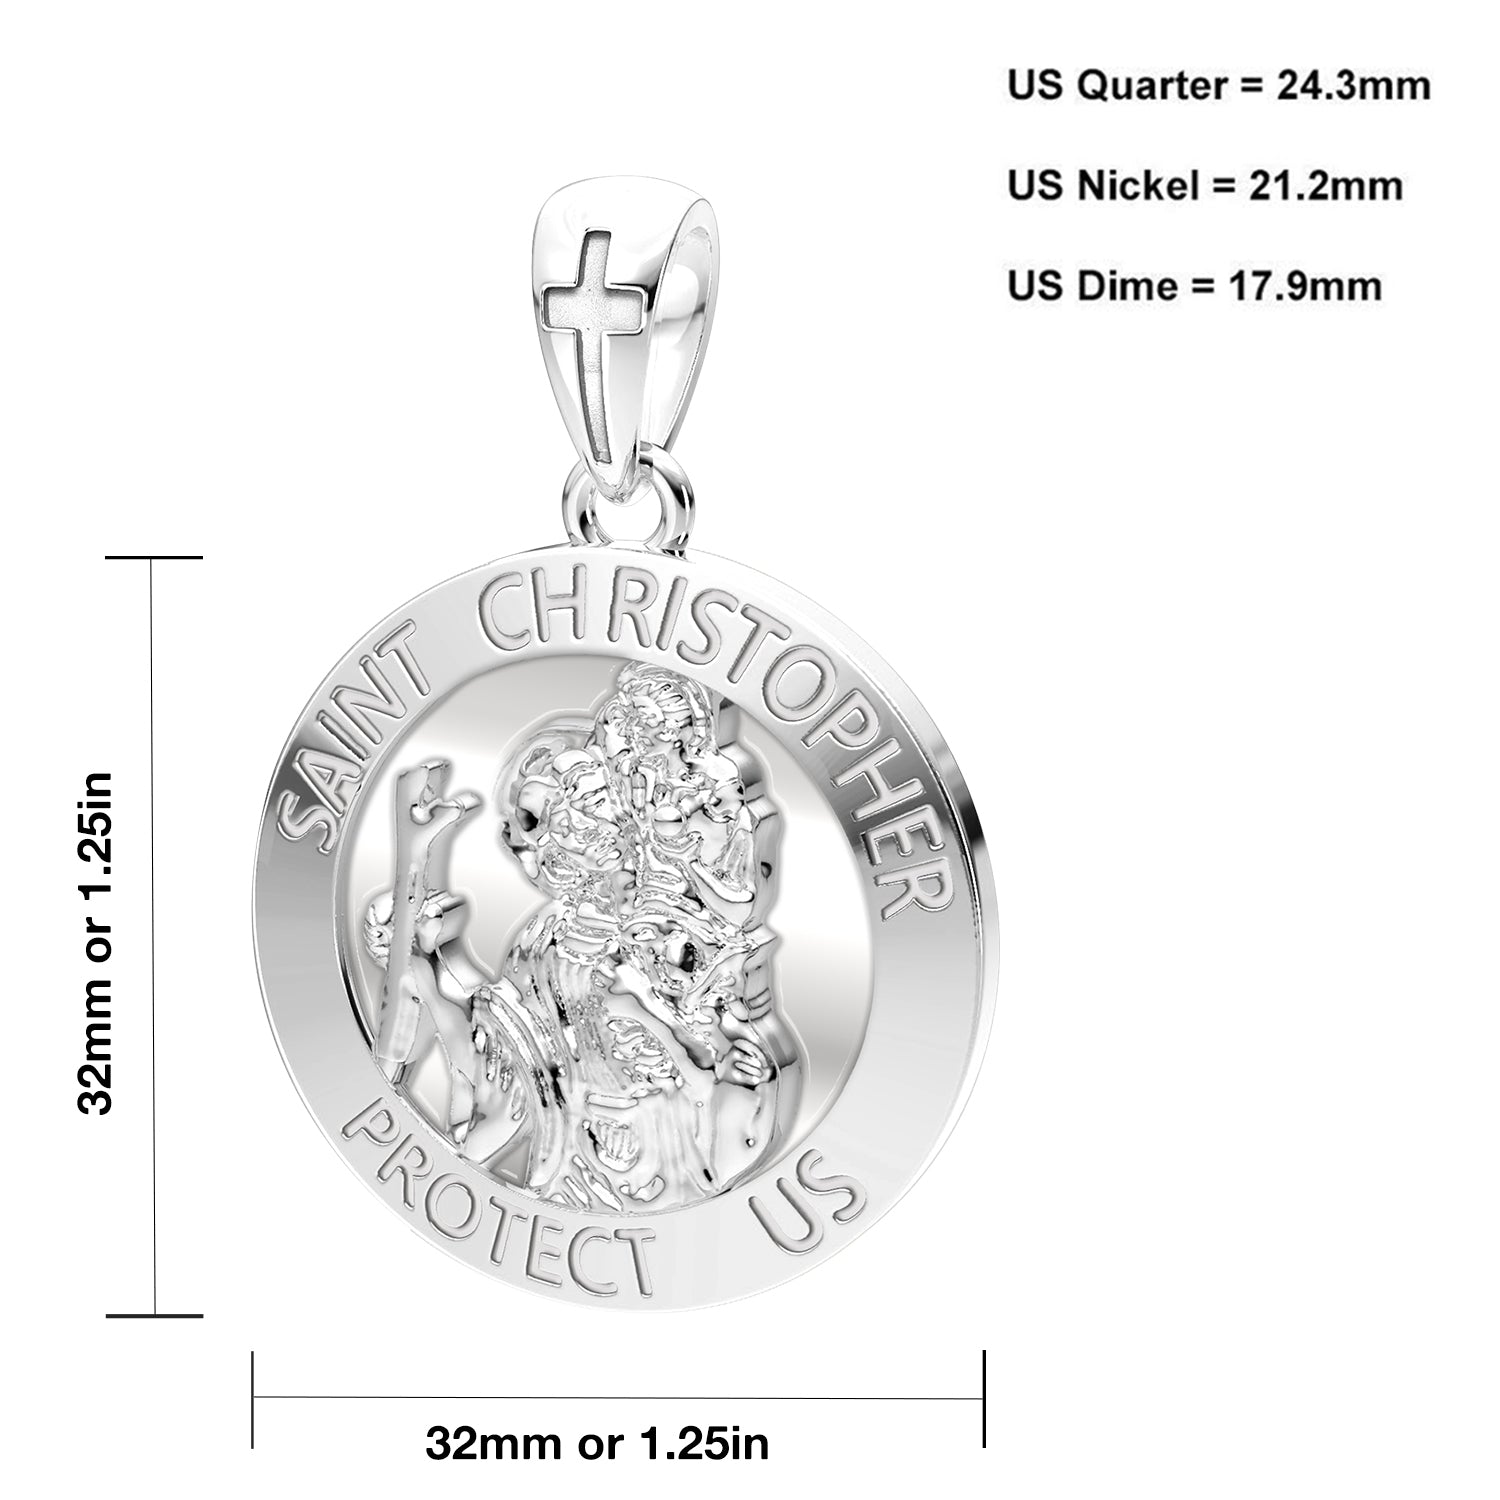 Men's XL 925 Sterling Silver 1.25in St Saint Christopher Medal High Polished Pendant Necklace, 32mm - US Jewels